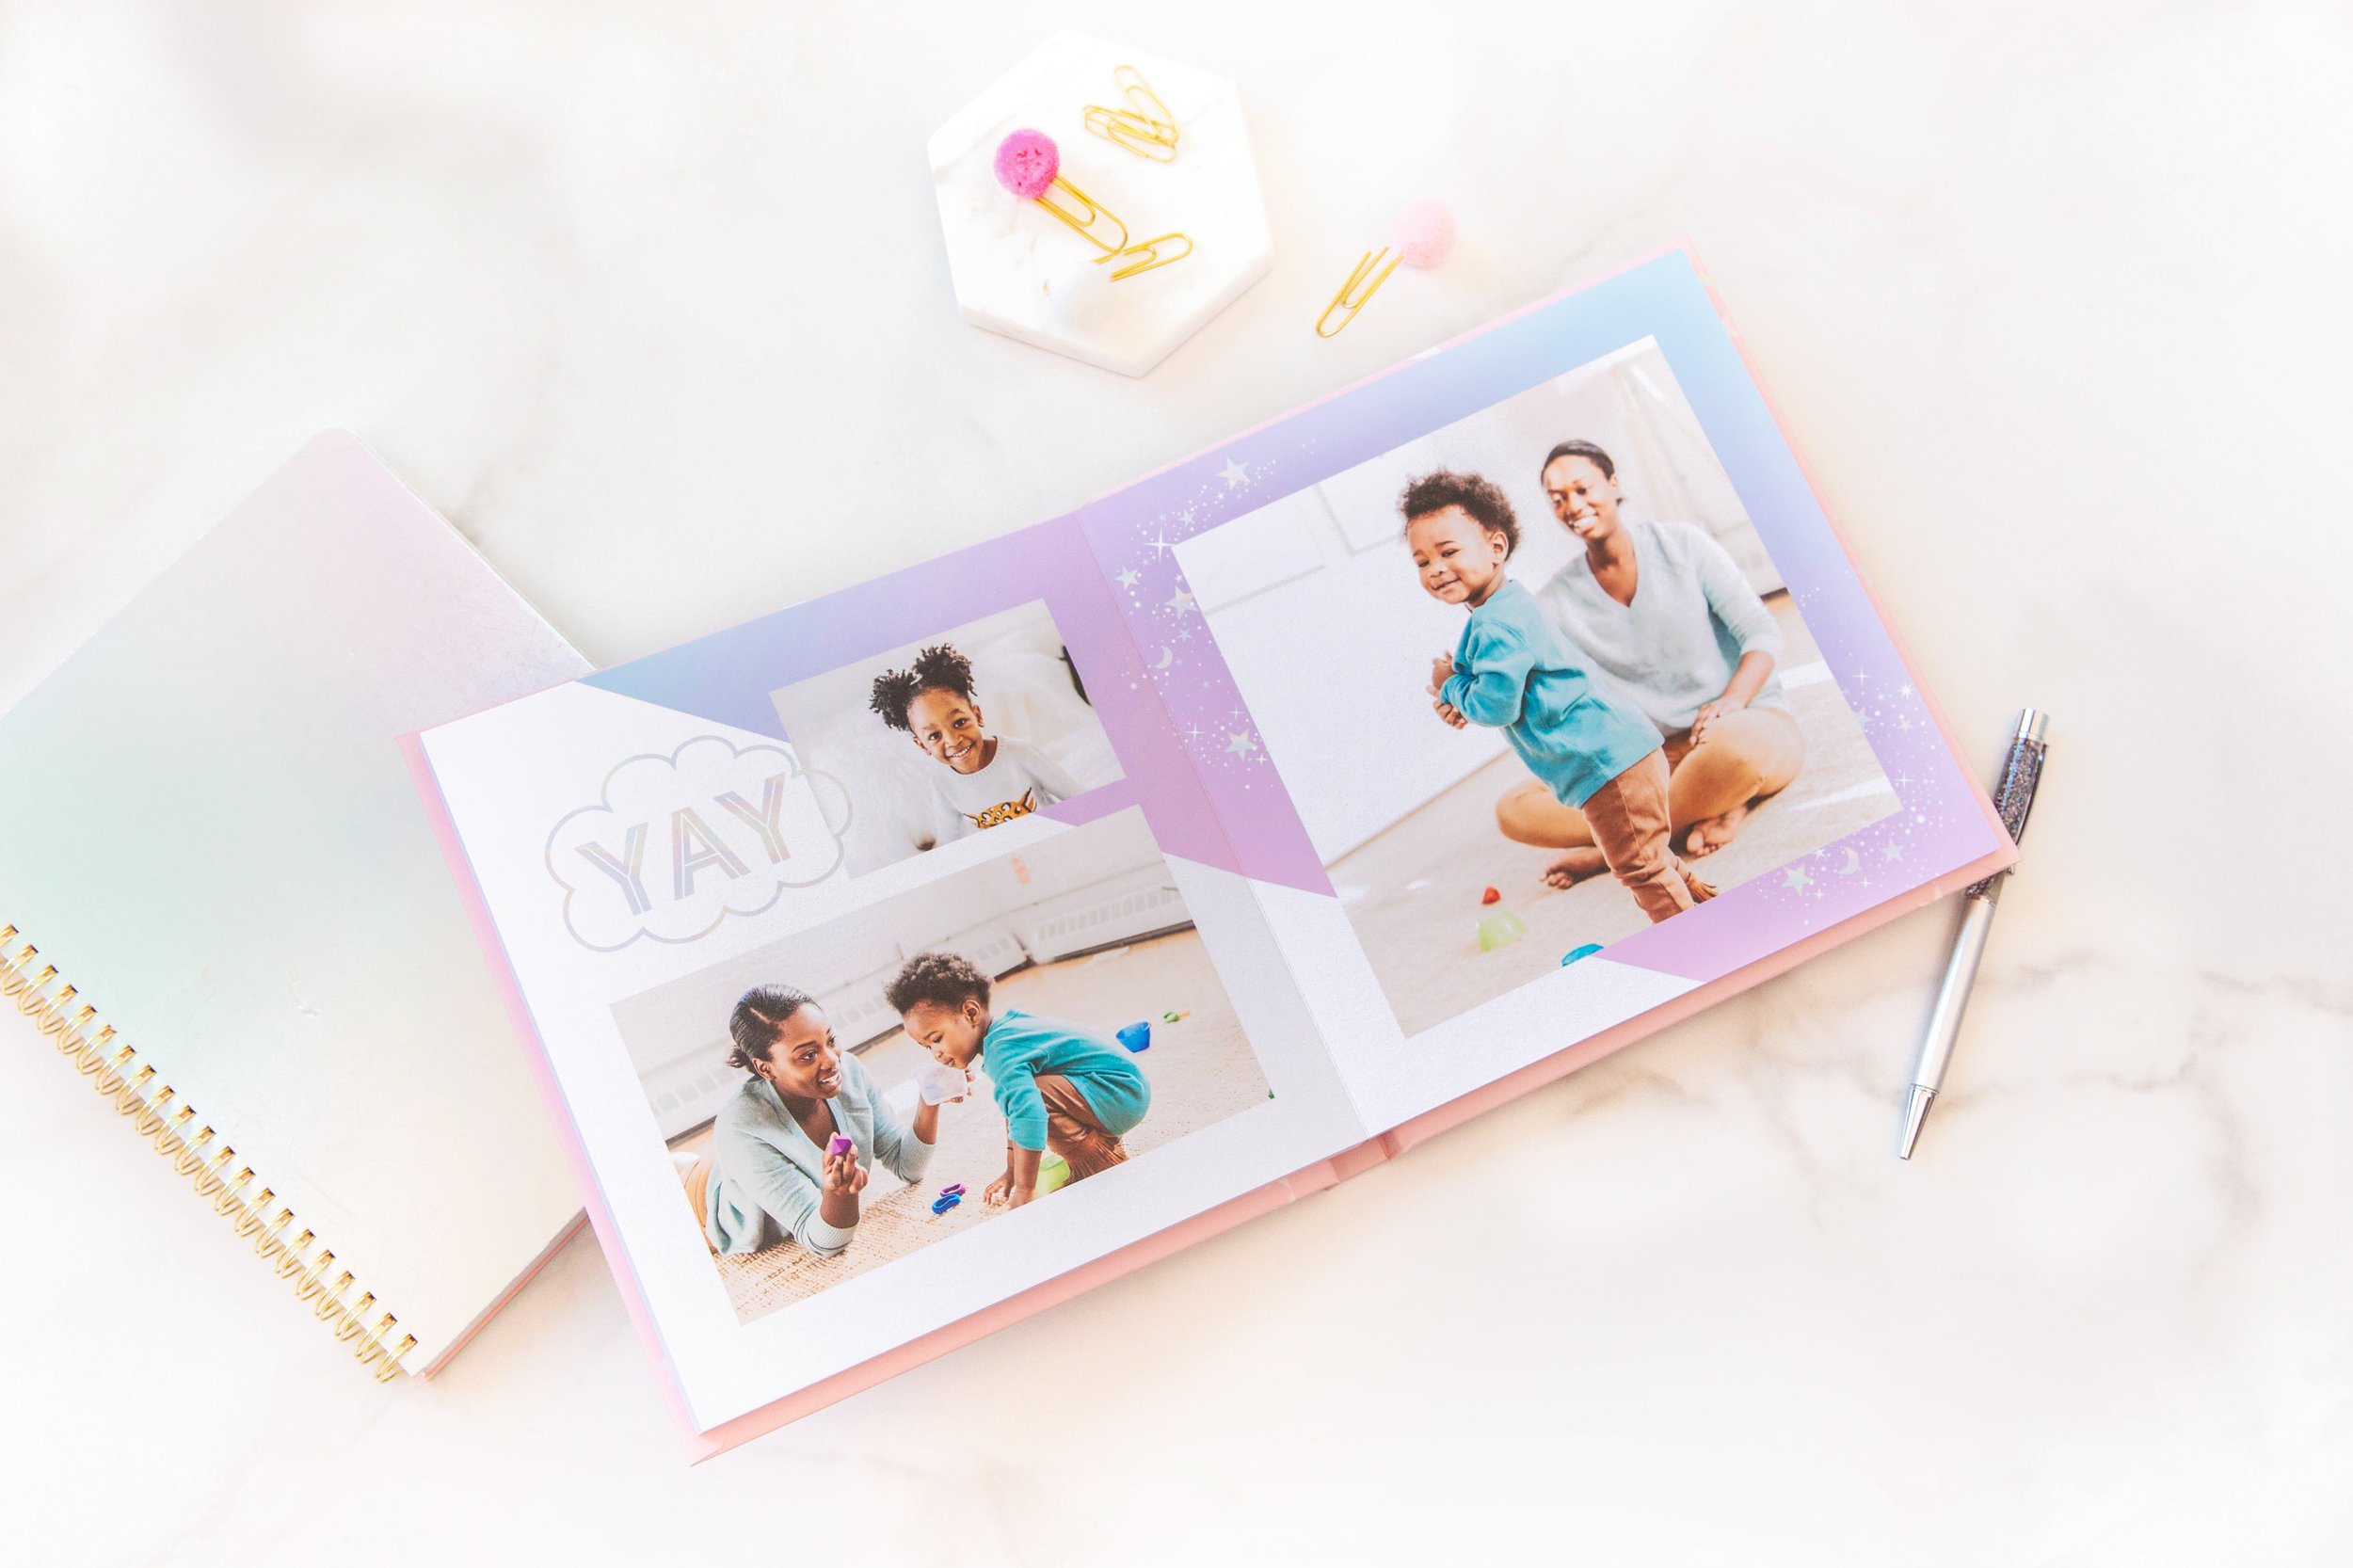 Scrapbooking vs. Photo Books: Which Is Best To Preserve Your Memories? —  Mixbook Inspiration